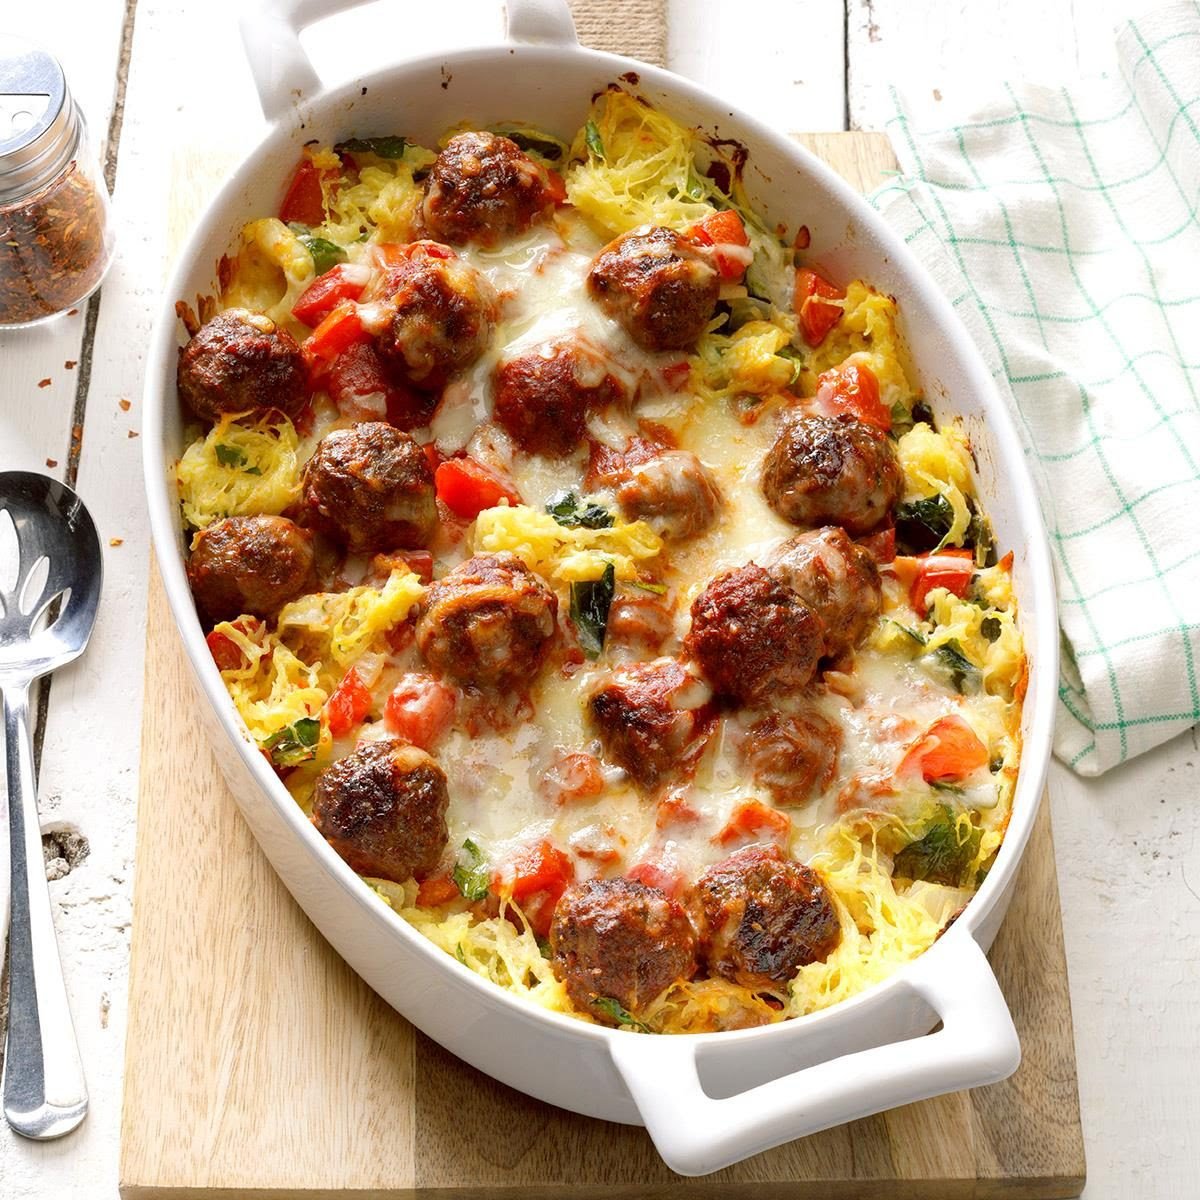 30 Light Casseroles for Tonight’s Dinner and Tomorrow’s Lunch
tasteofhome.com/collection/lig…
@tasteofhome